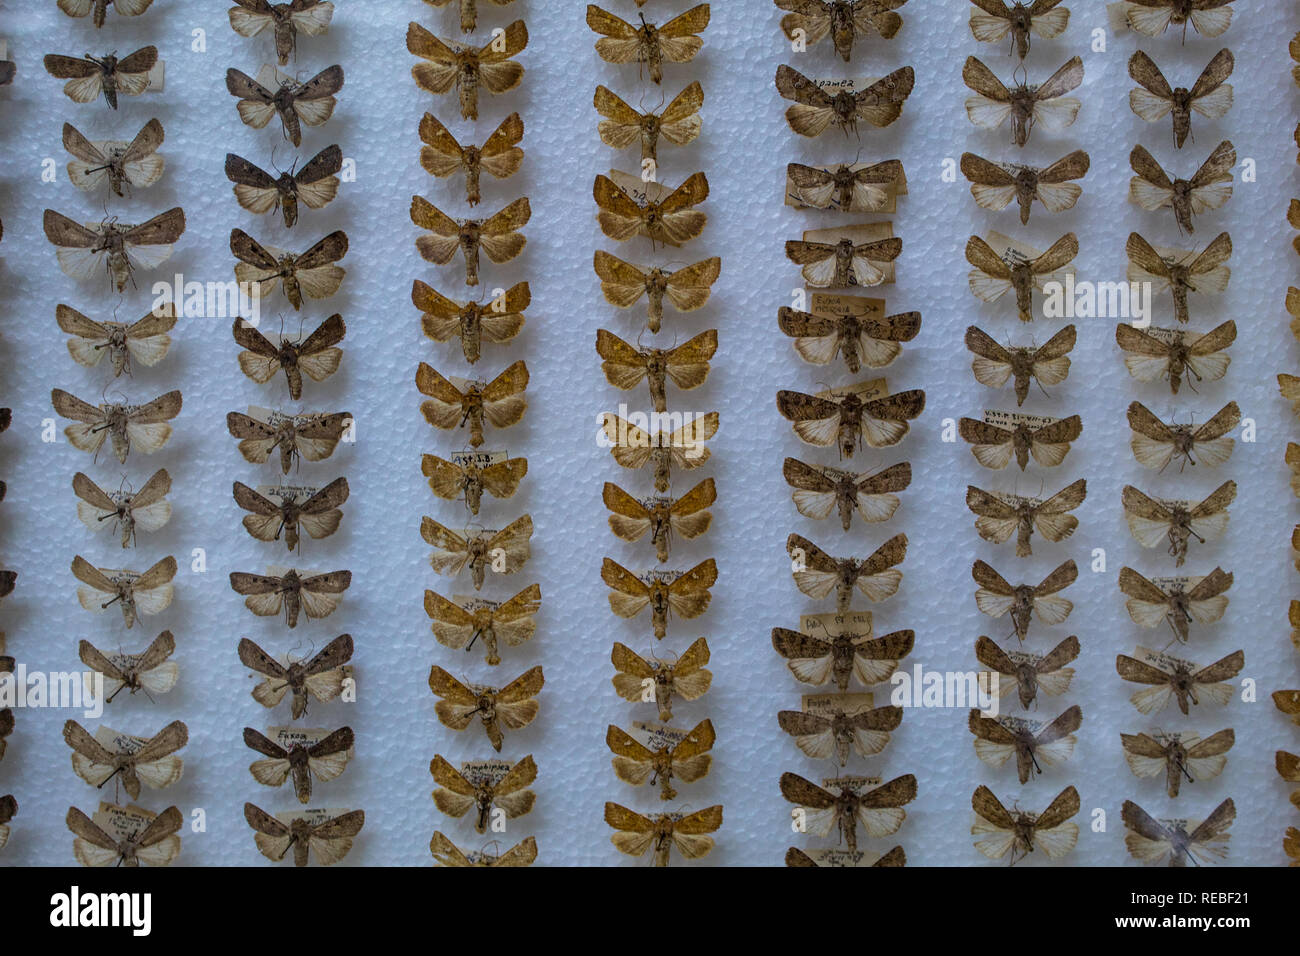 A scientific collection of moths pinned on a styrofoam base at La Salle Natural History Museum, San Jose, Costa Rica Stock Photo